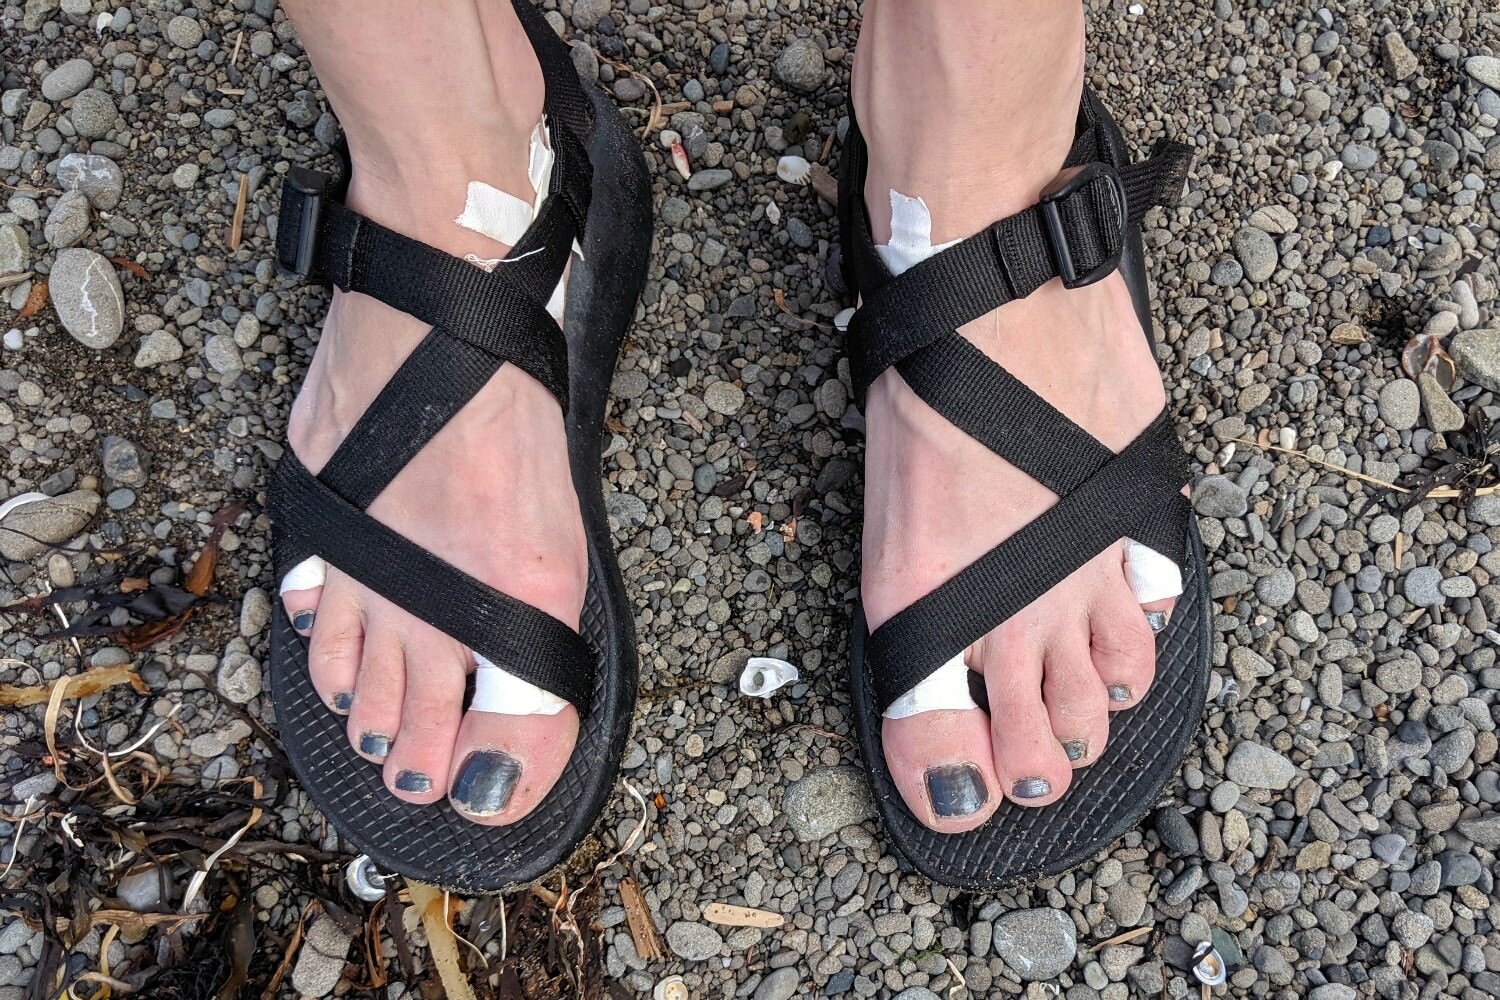 Taped feet to prevent blisters_ Olympic coast.jpeg